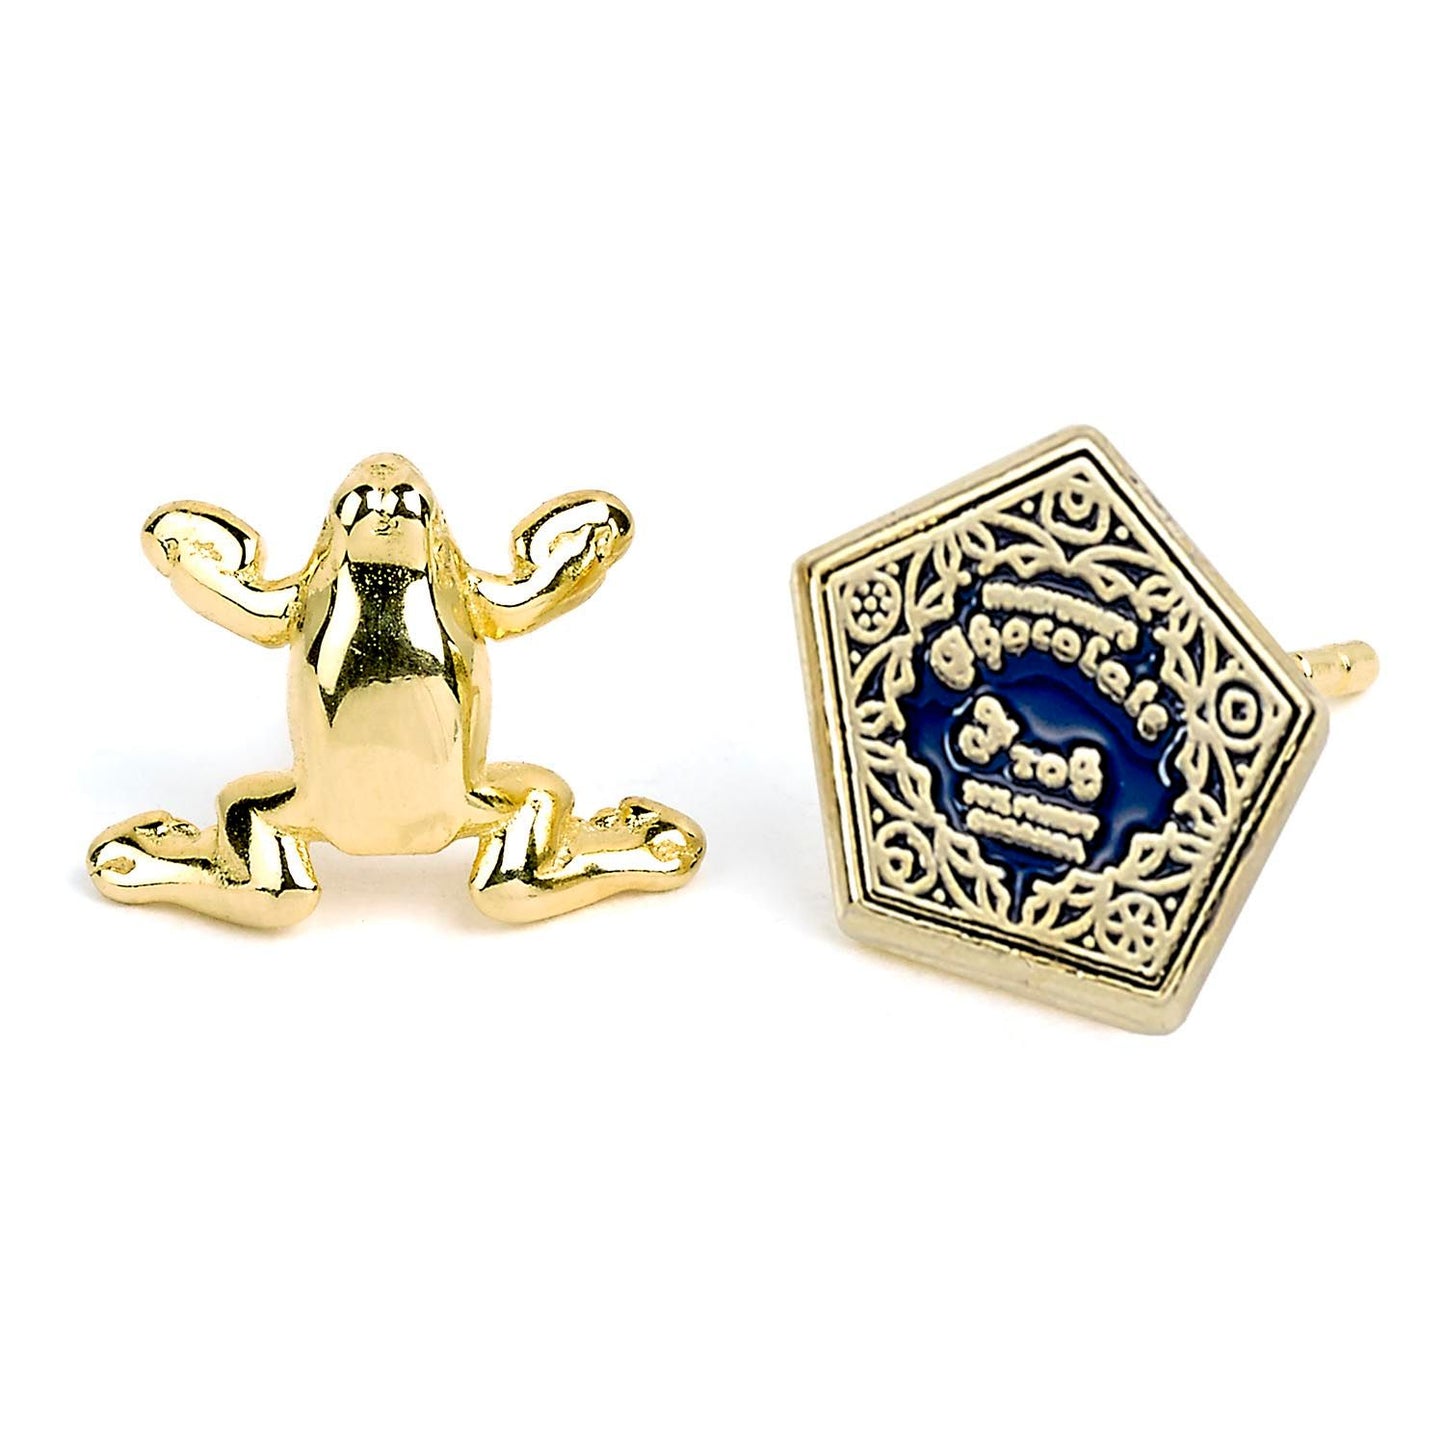 Harry Potter  Chocolate Frog and Box Stud Earrings - Silver